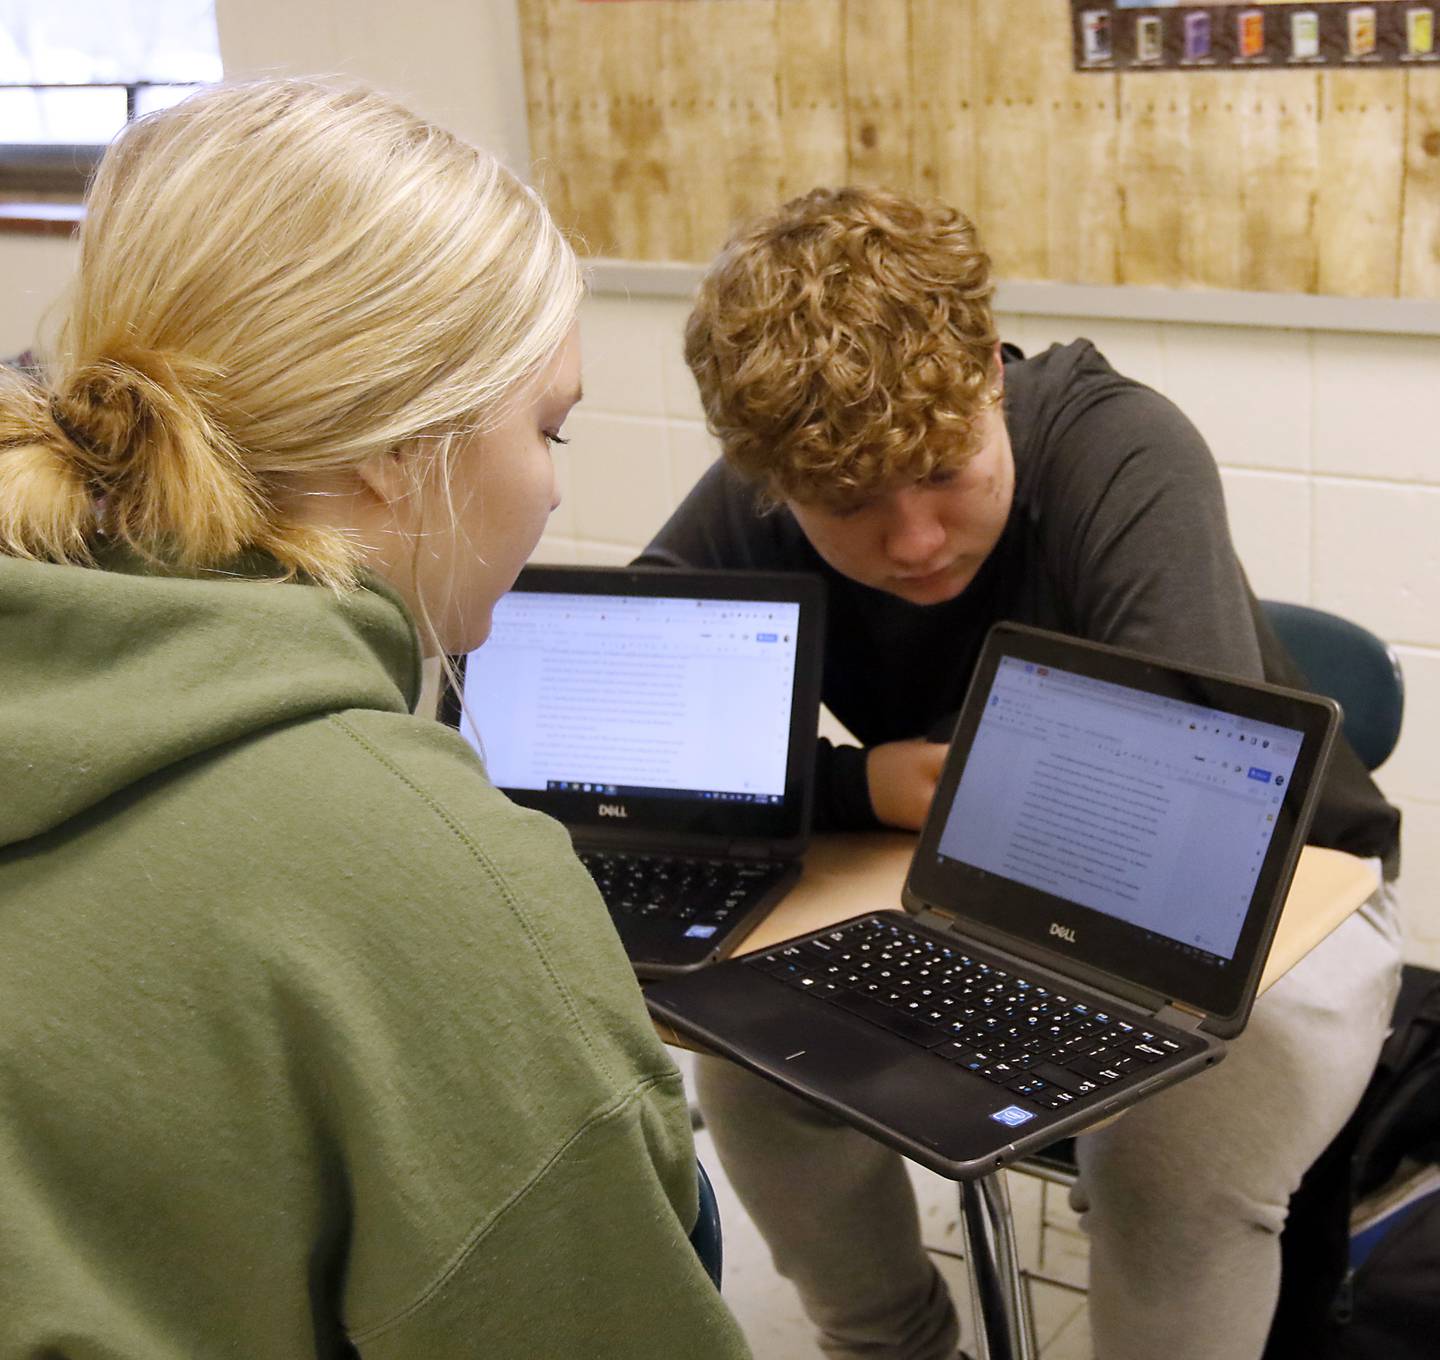 Woodstock High School senior Avery Sternitzky works with fellow senior Hayden Haak during a dual credit composition class on Wednesday, March 1, 2023, at Woodstock High School.